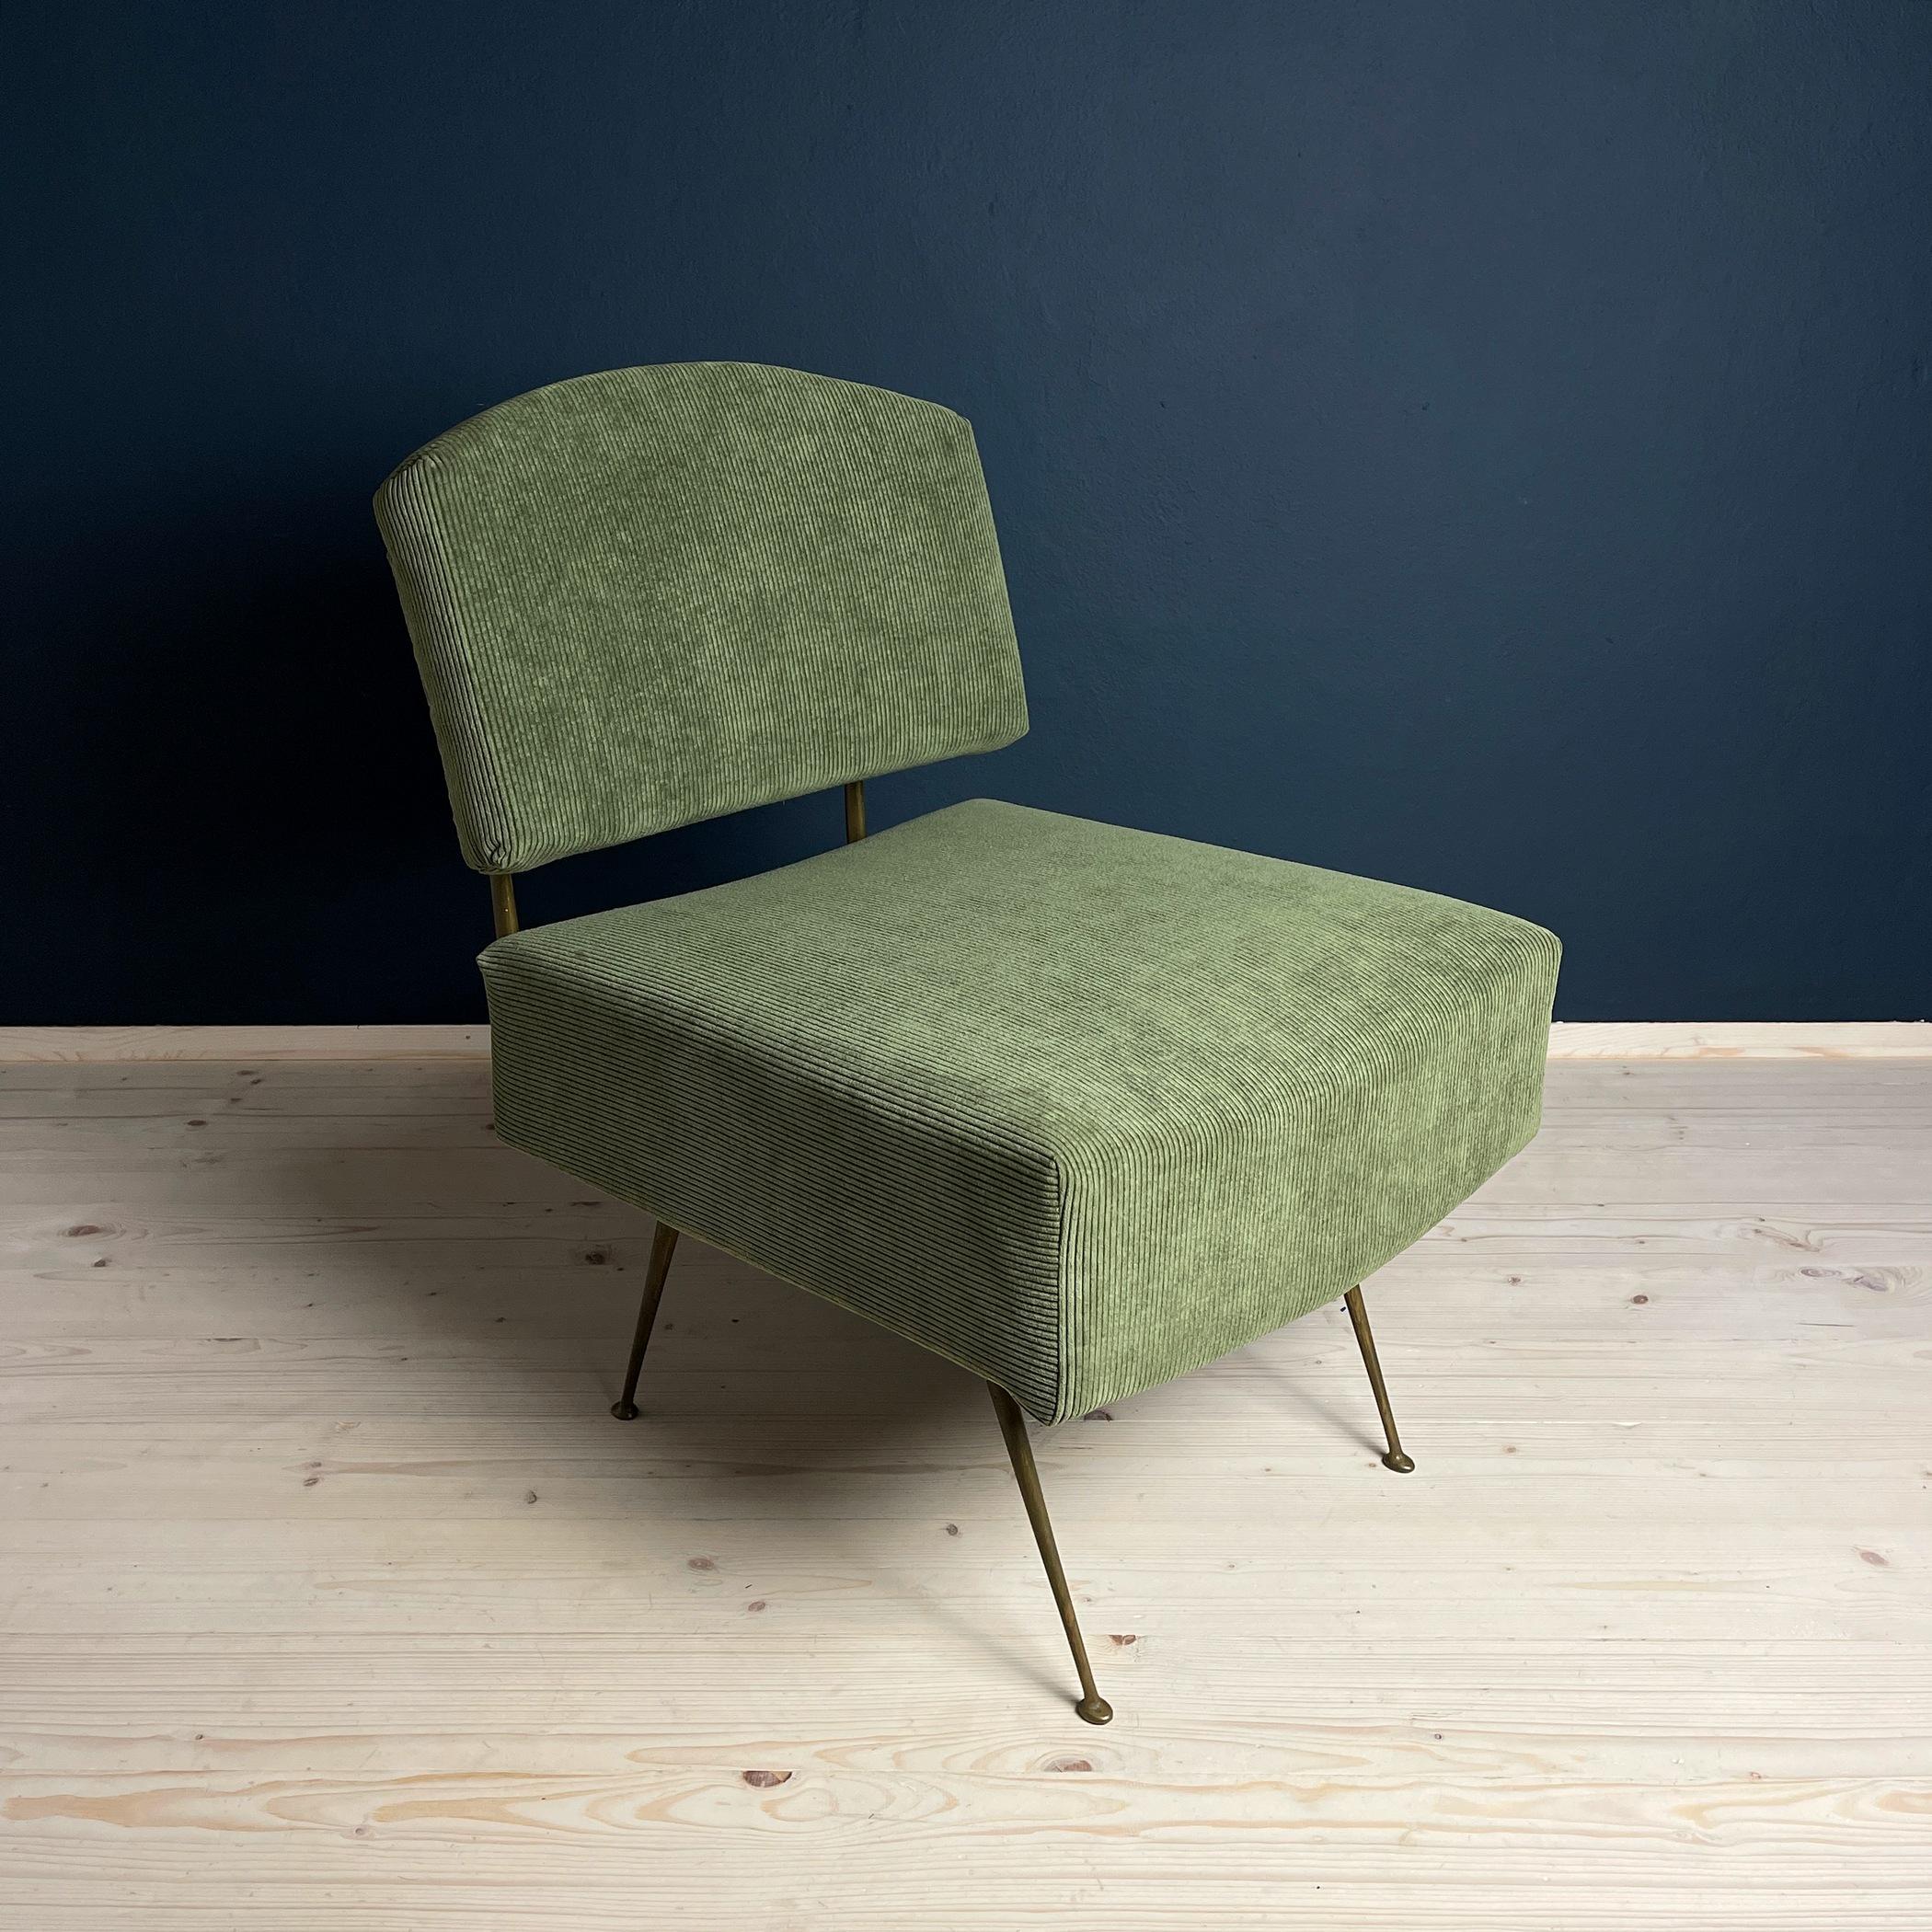 Introducing a magnificent vintage lounge chair, hailing from Italy in the 1950s. This exquisite piece of Italian furniture exudes an air of timeless charm, combining a touch of mid-century style with the comforts of home. The chair's green corduroy